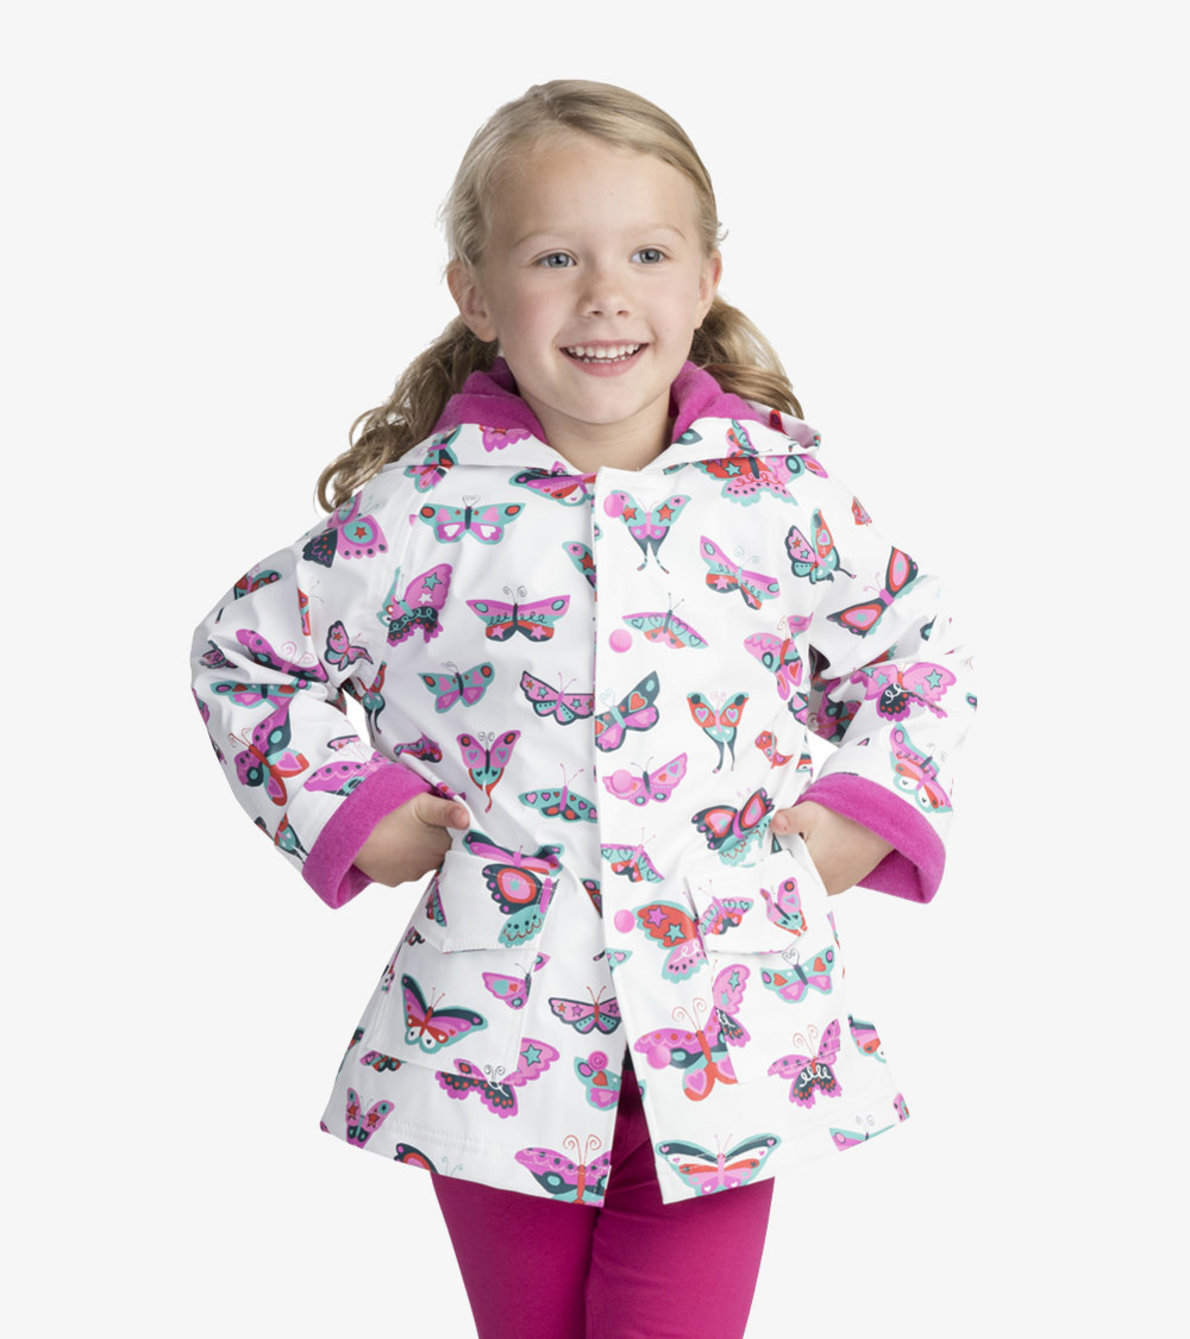 View larger image of Groovy Butterflies Raincoat